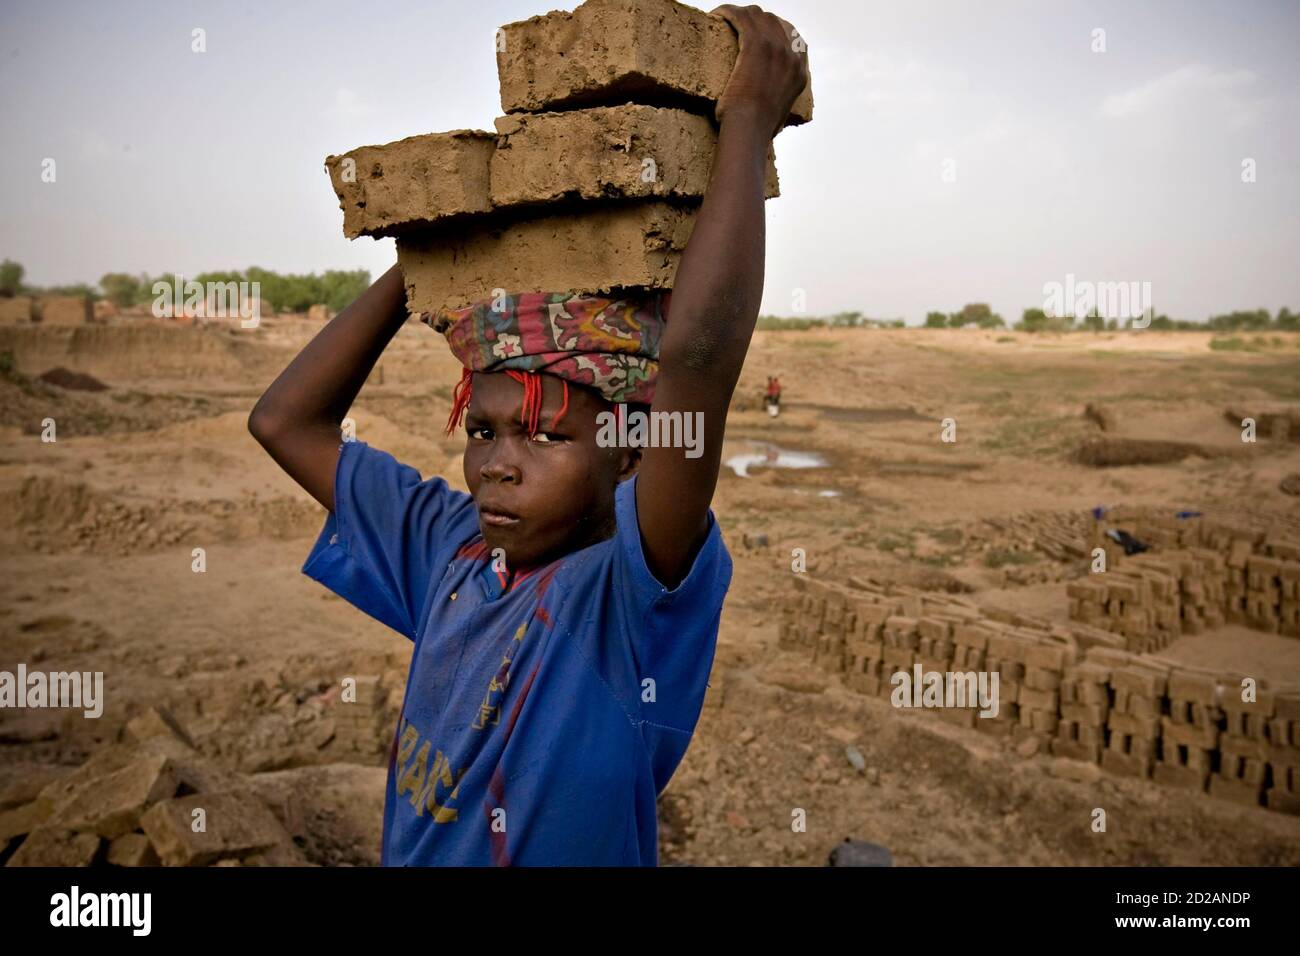 A boy carries bricks on his head at a riverside factory where mud is fired in kilns to produce building materials on the outskirts of Chad's capital N'Djamena, May 31 2008. Many children are used as cheap labour transporting bricks. REUTERS/Finbarr O'Reilly (CHAD) Stock Photo